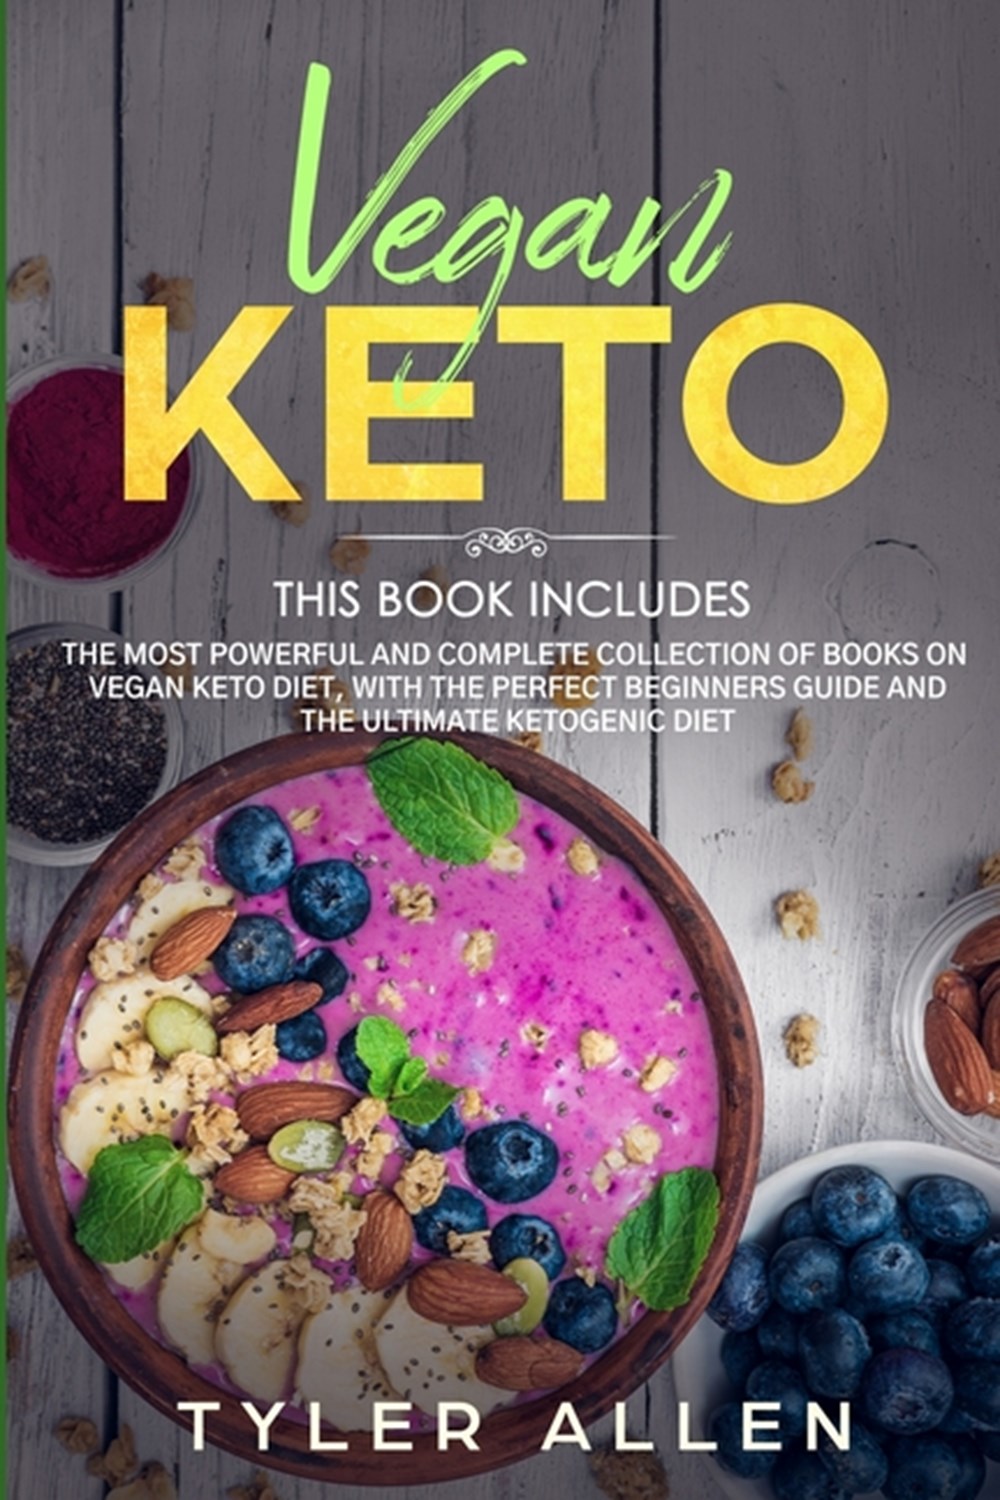 Vegan Keto: 2 Books in 1: The Most Powerful and Complete Collection of Books on Vegan Keto Diet, Wit